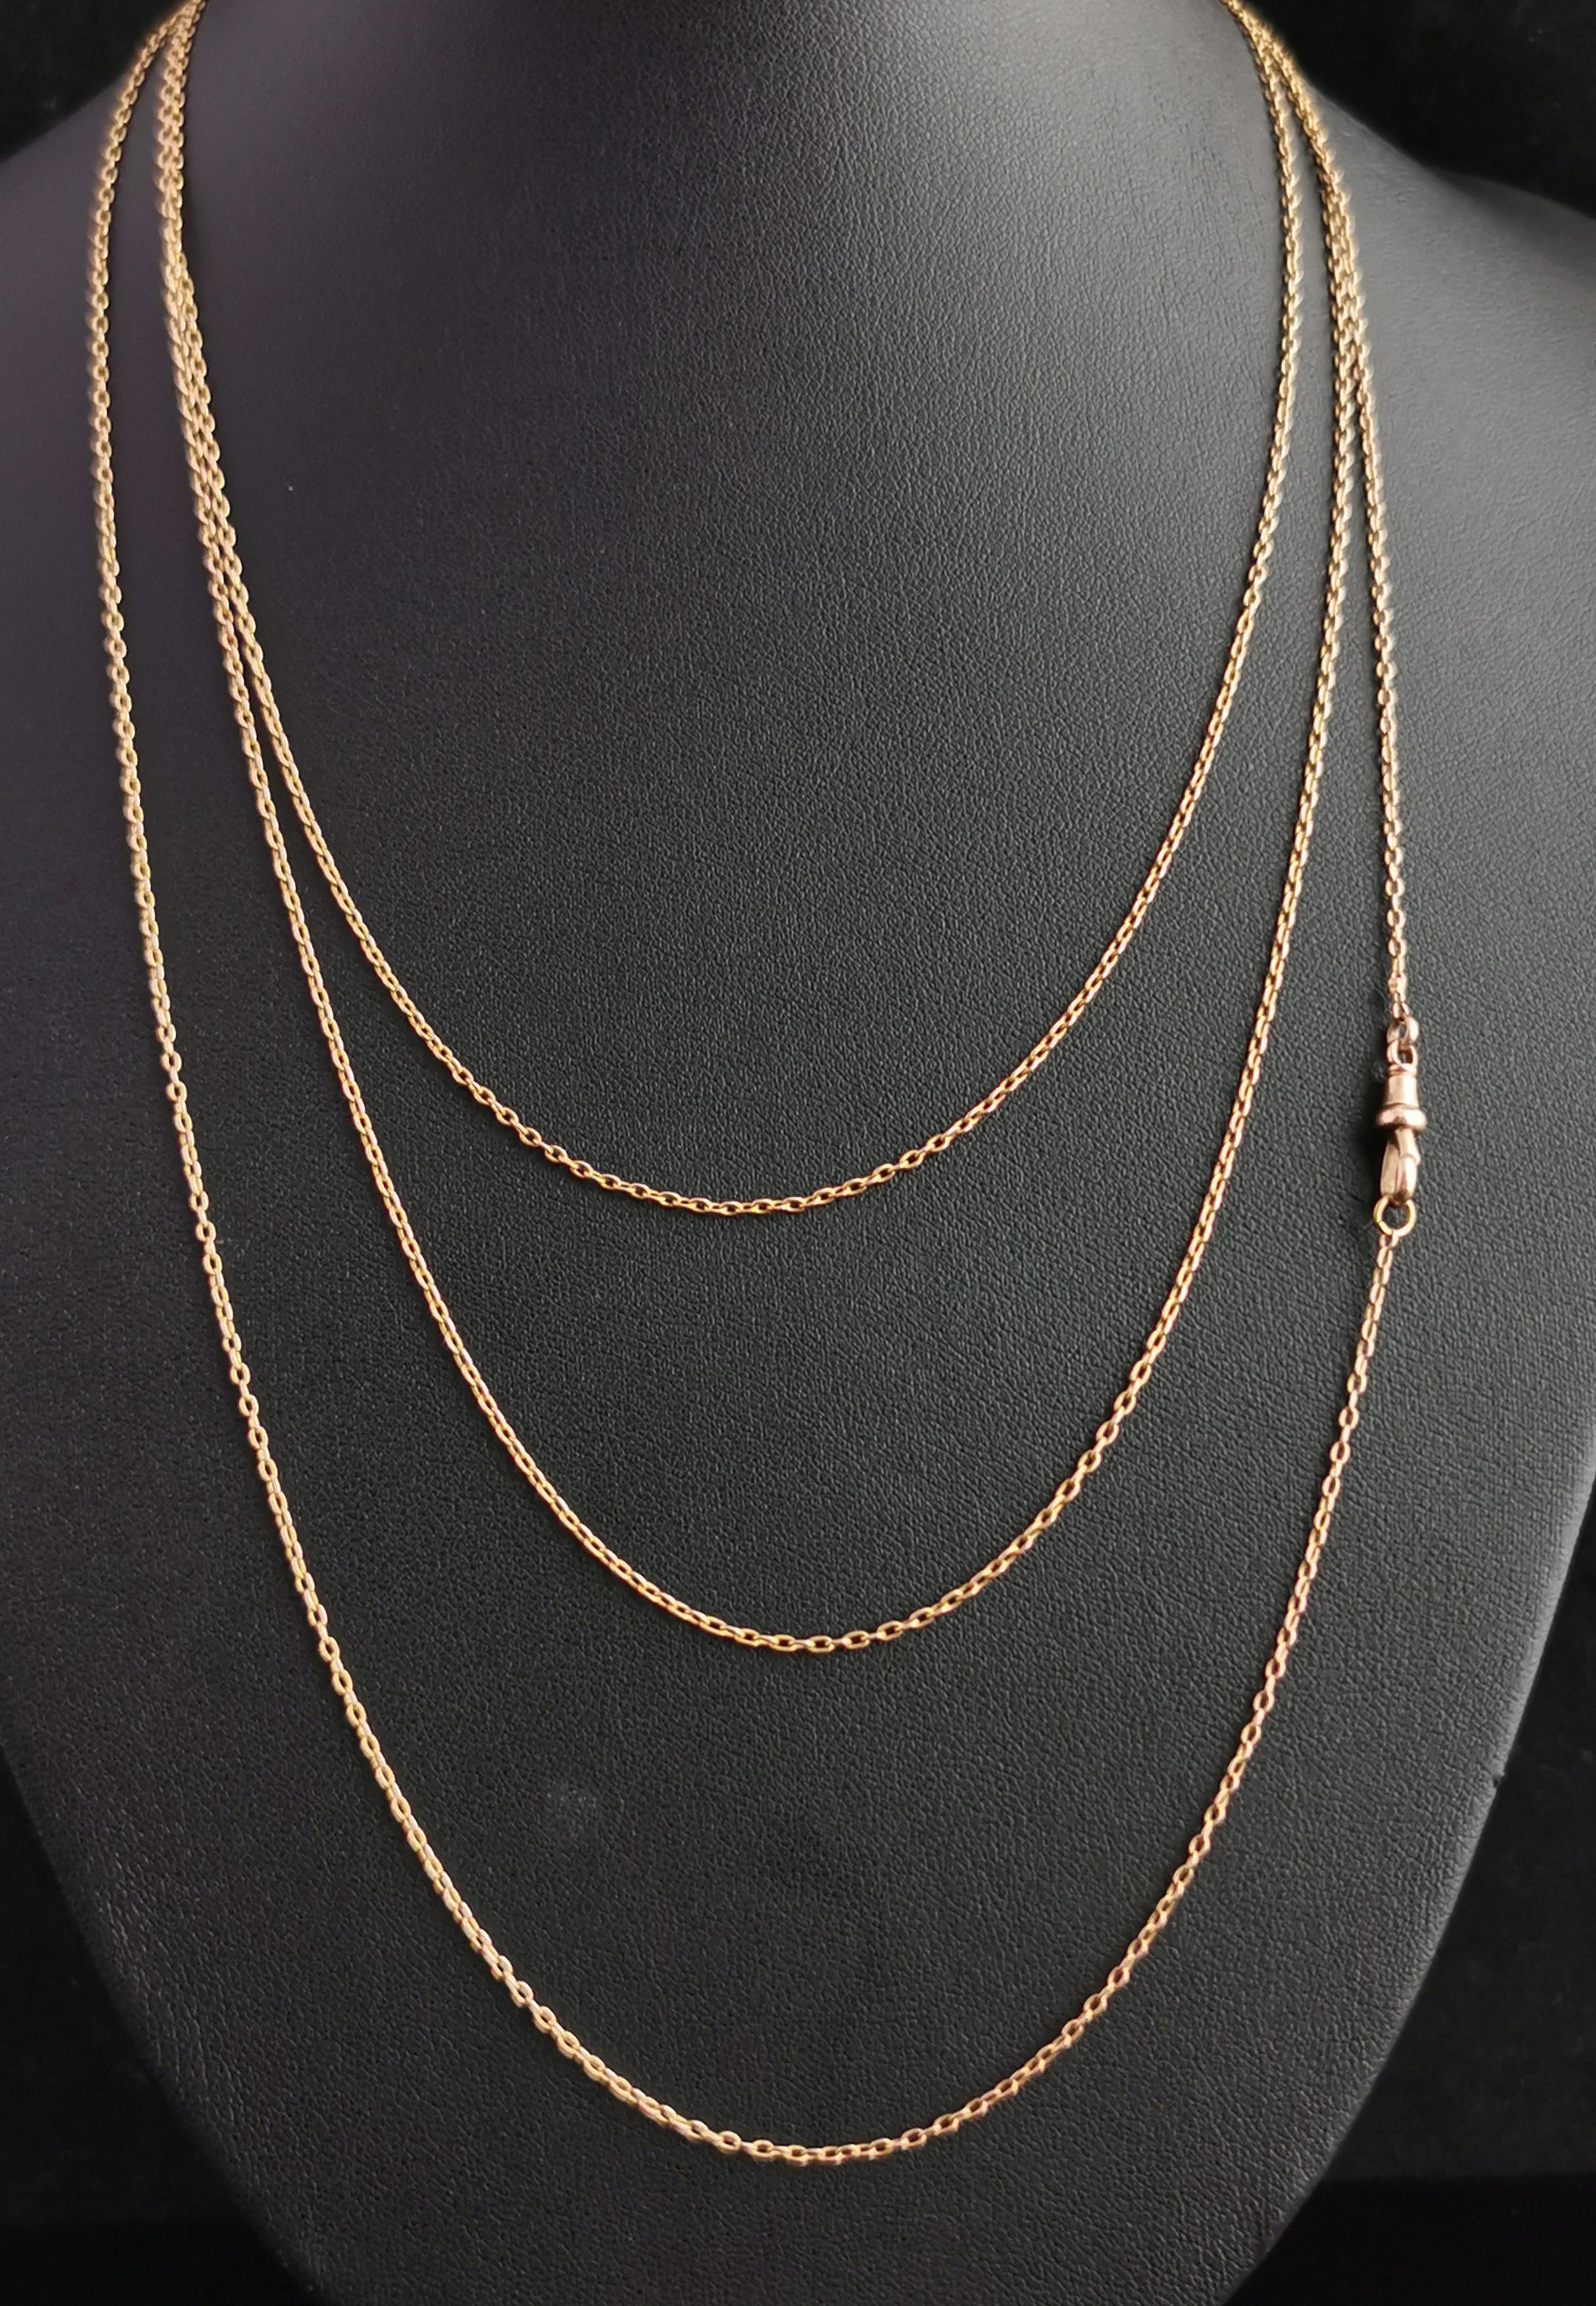 Antique 15k Yellow Gold Longuard Chain Necklace, Trace Link 5